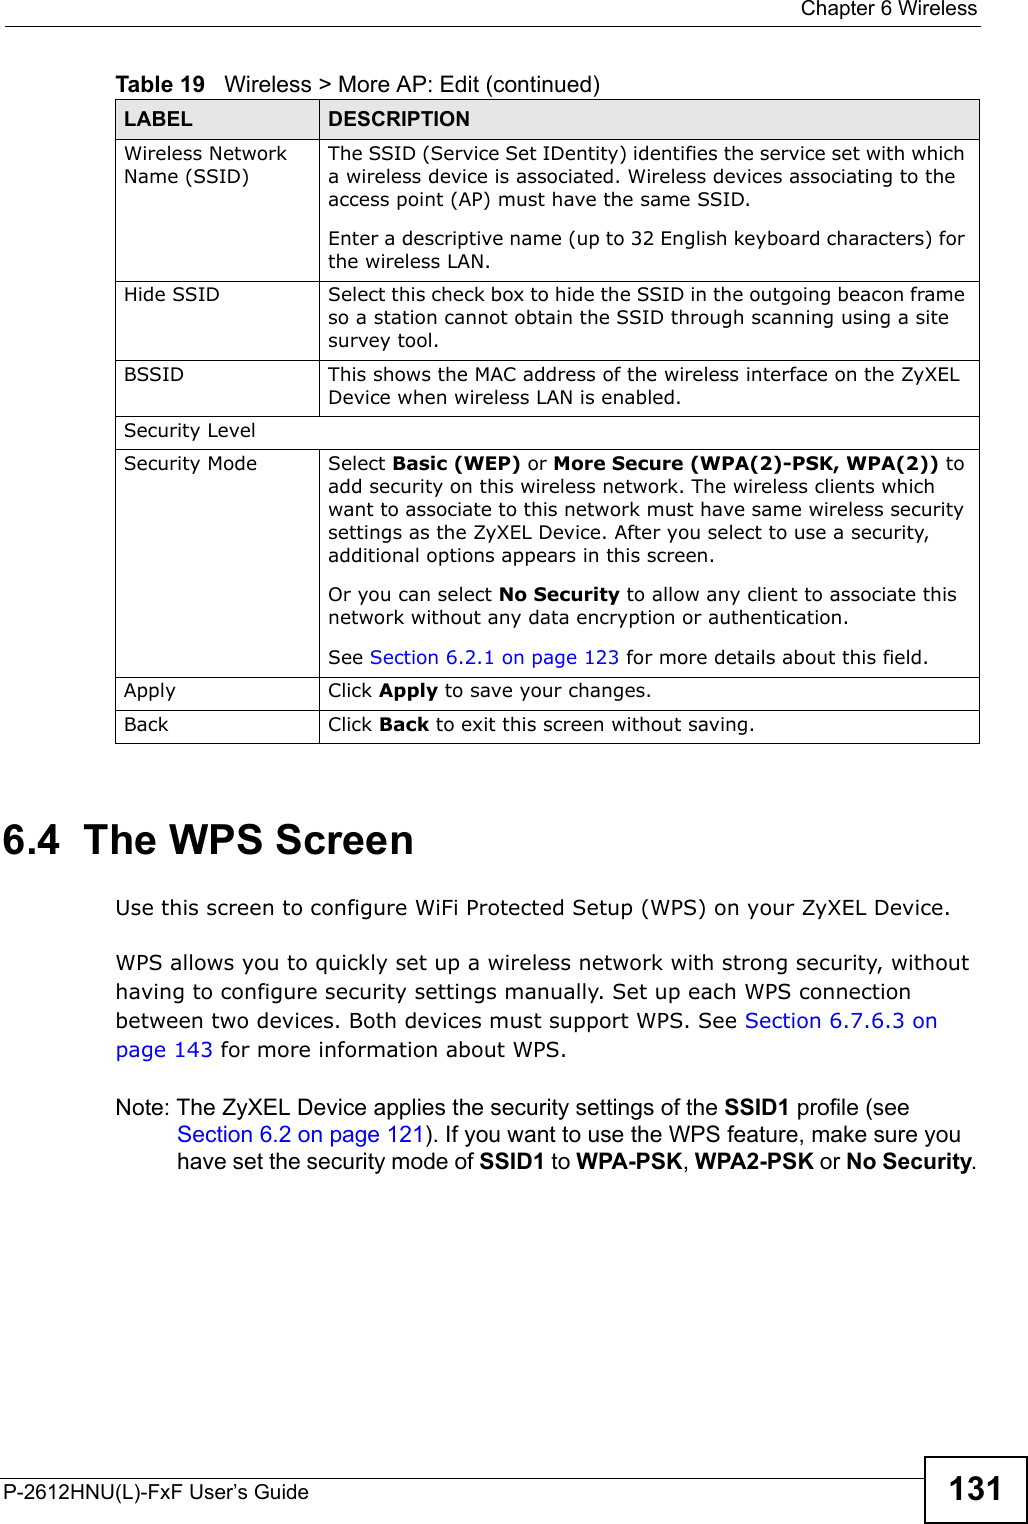  Chapter 6 WirelessP-2612HNU(L)-FxF User’s Guide 1316.4  The WPS ScreenUse this screen to configure WiFi Protected Setup (WPS) on your ZyXEL Device.WPS allows you to quickly set up a wireless network with strong security, without having to configure security settings manually. Set up each WPS connection between two devices. Both devices must support WPS. See Section 6.7.6.3 on page 143 for more information about WPS.Note: The ZyXEL Device applies the security settings of the SSID1 profile (see Section 6.2 on page 121). If you want to use the WPS feature, make sure you have set the security mode of SSID1 to WPA-PSK, WPA2-PSK or No Security.Wireless Network Name (SSID)The SSID (Service Set IDentity) identifies the service set with which a wireless device is associated. Wireless devices associating to the access point (AP) must have the same SSID. Enter a descriptive name (up to 32 English keyboard characters) for the wireless LAN. Hide SSID Select this check box to hide the SSID in the outgoing beacon frame so a station cannot obtain the SSID through scanning using a site survey tool.BSSID This shows the MAC address of the wireless interface on the ZyXEL Device when wireless LAN is enabled.Security LevelSecurity Mode Select Basic (WEP) or More Secure (WPA(2)-PSK, WPA(2)) to add security on this wireless network. The wireless clients which want to associate to this network must have same wireless security settings as the ZyXEL Device. After you select to use a security, additional options appears in this screen. Or you can select No Security to allow any client to associate this network without any data encryption or authentication.See Section 6.2.1 on page 123 for more details about this field.Apply Click Apply to save your changes.Back Click Back to exit this screen without saving.Table 19   Wireless &gt; More AP: Edit (continued)LABEL DESCRIPTION